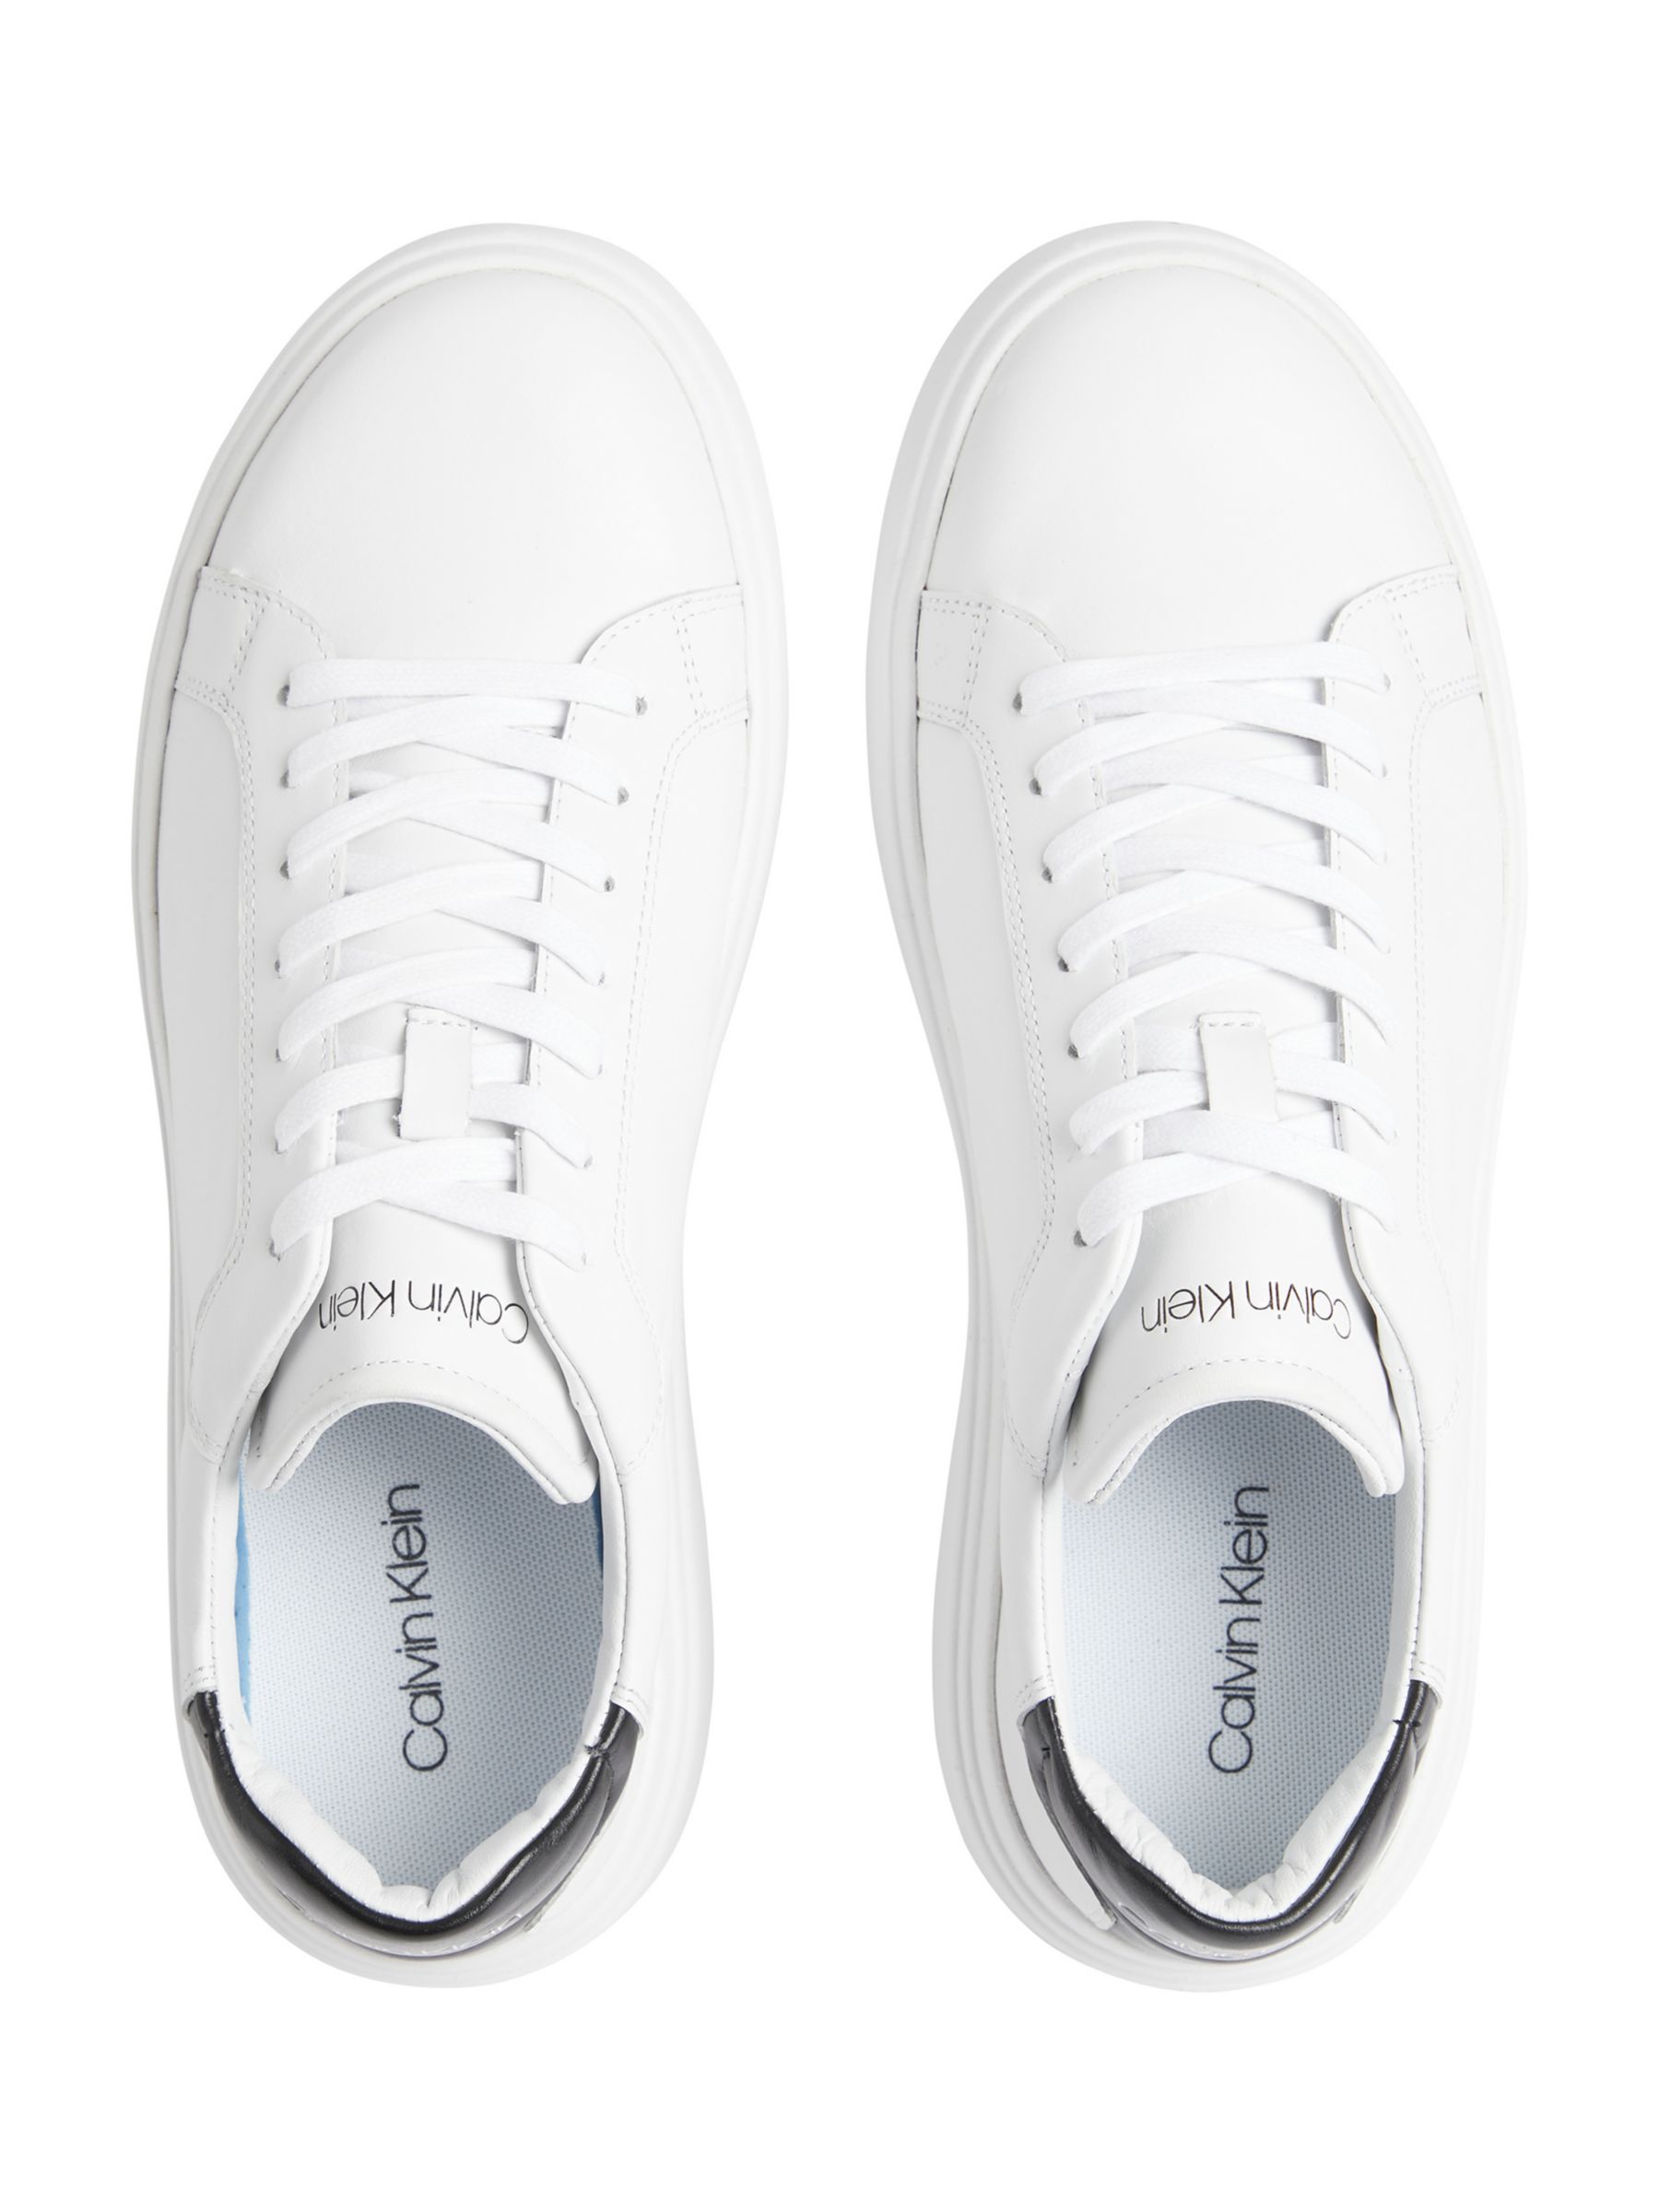 Calvin Klein Leather Low Top Lace Up Trainers, White/Black, 9